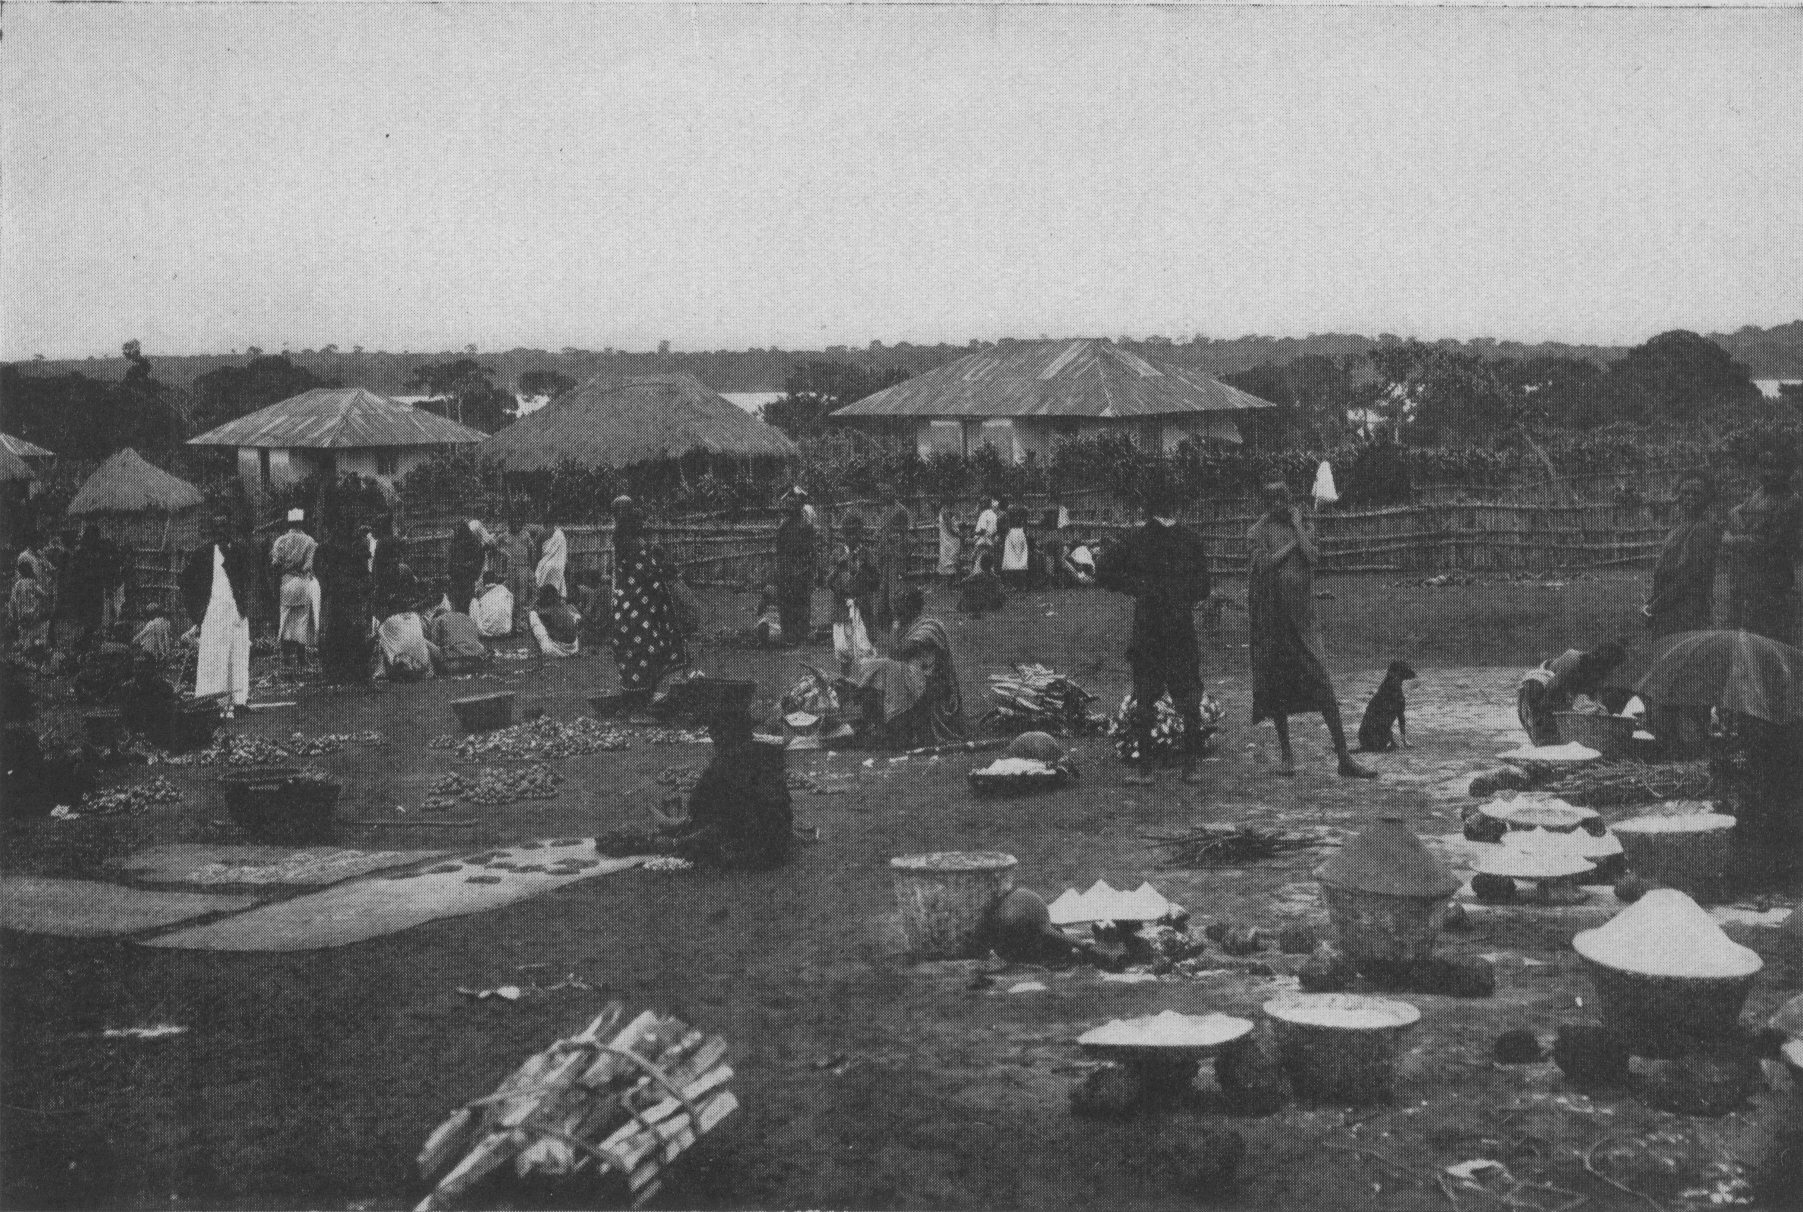 people standing in fenced area with various goods in bowls and low houses in background